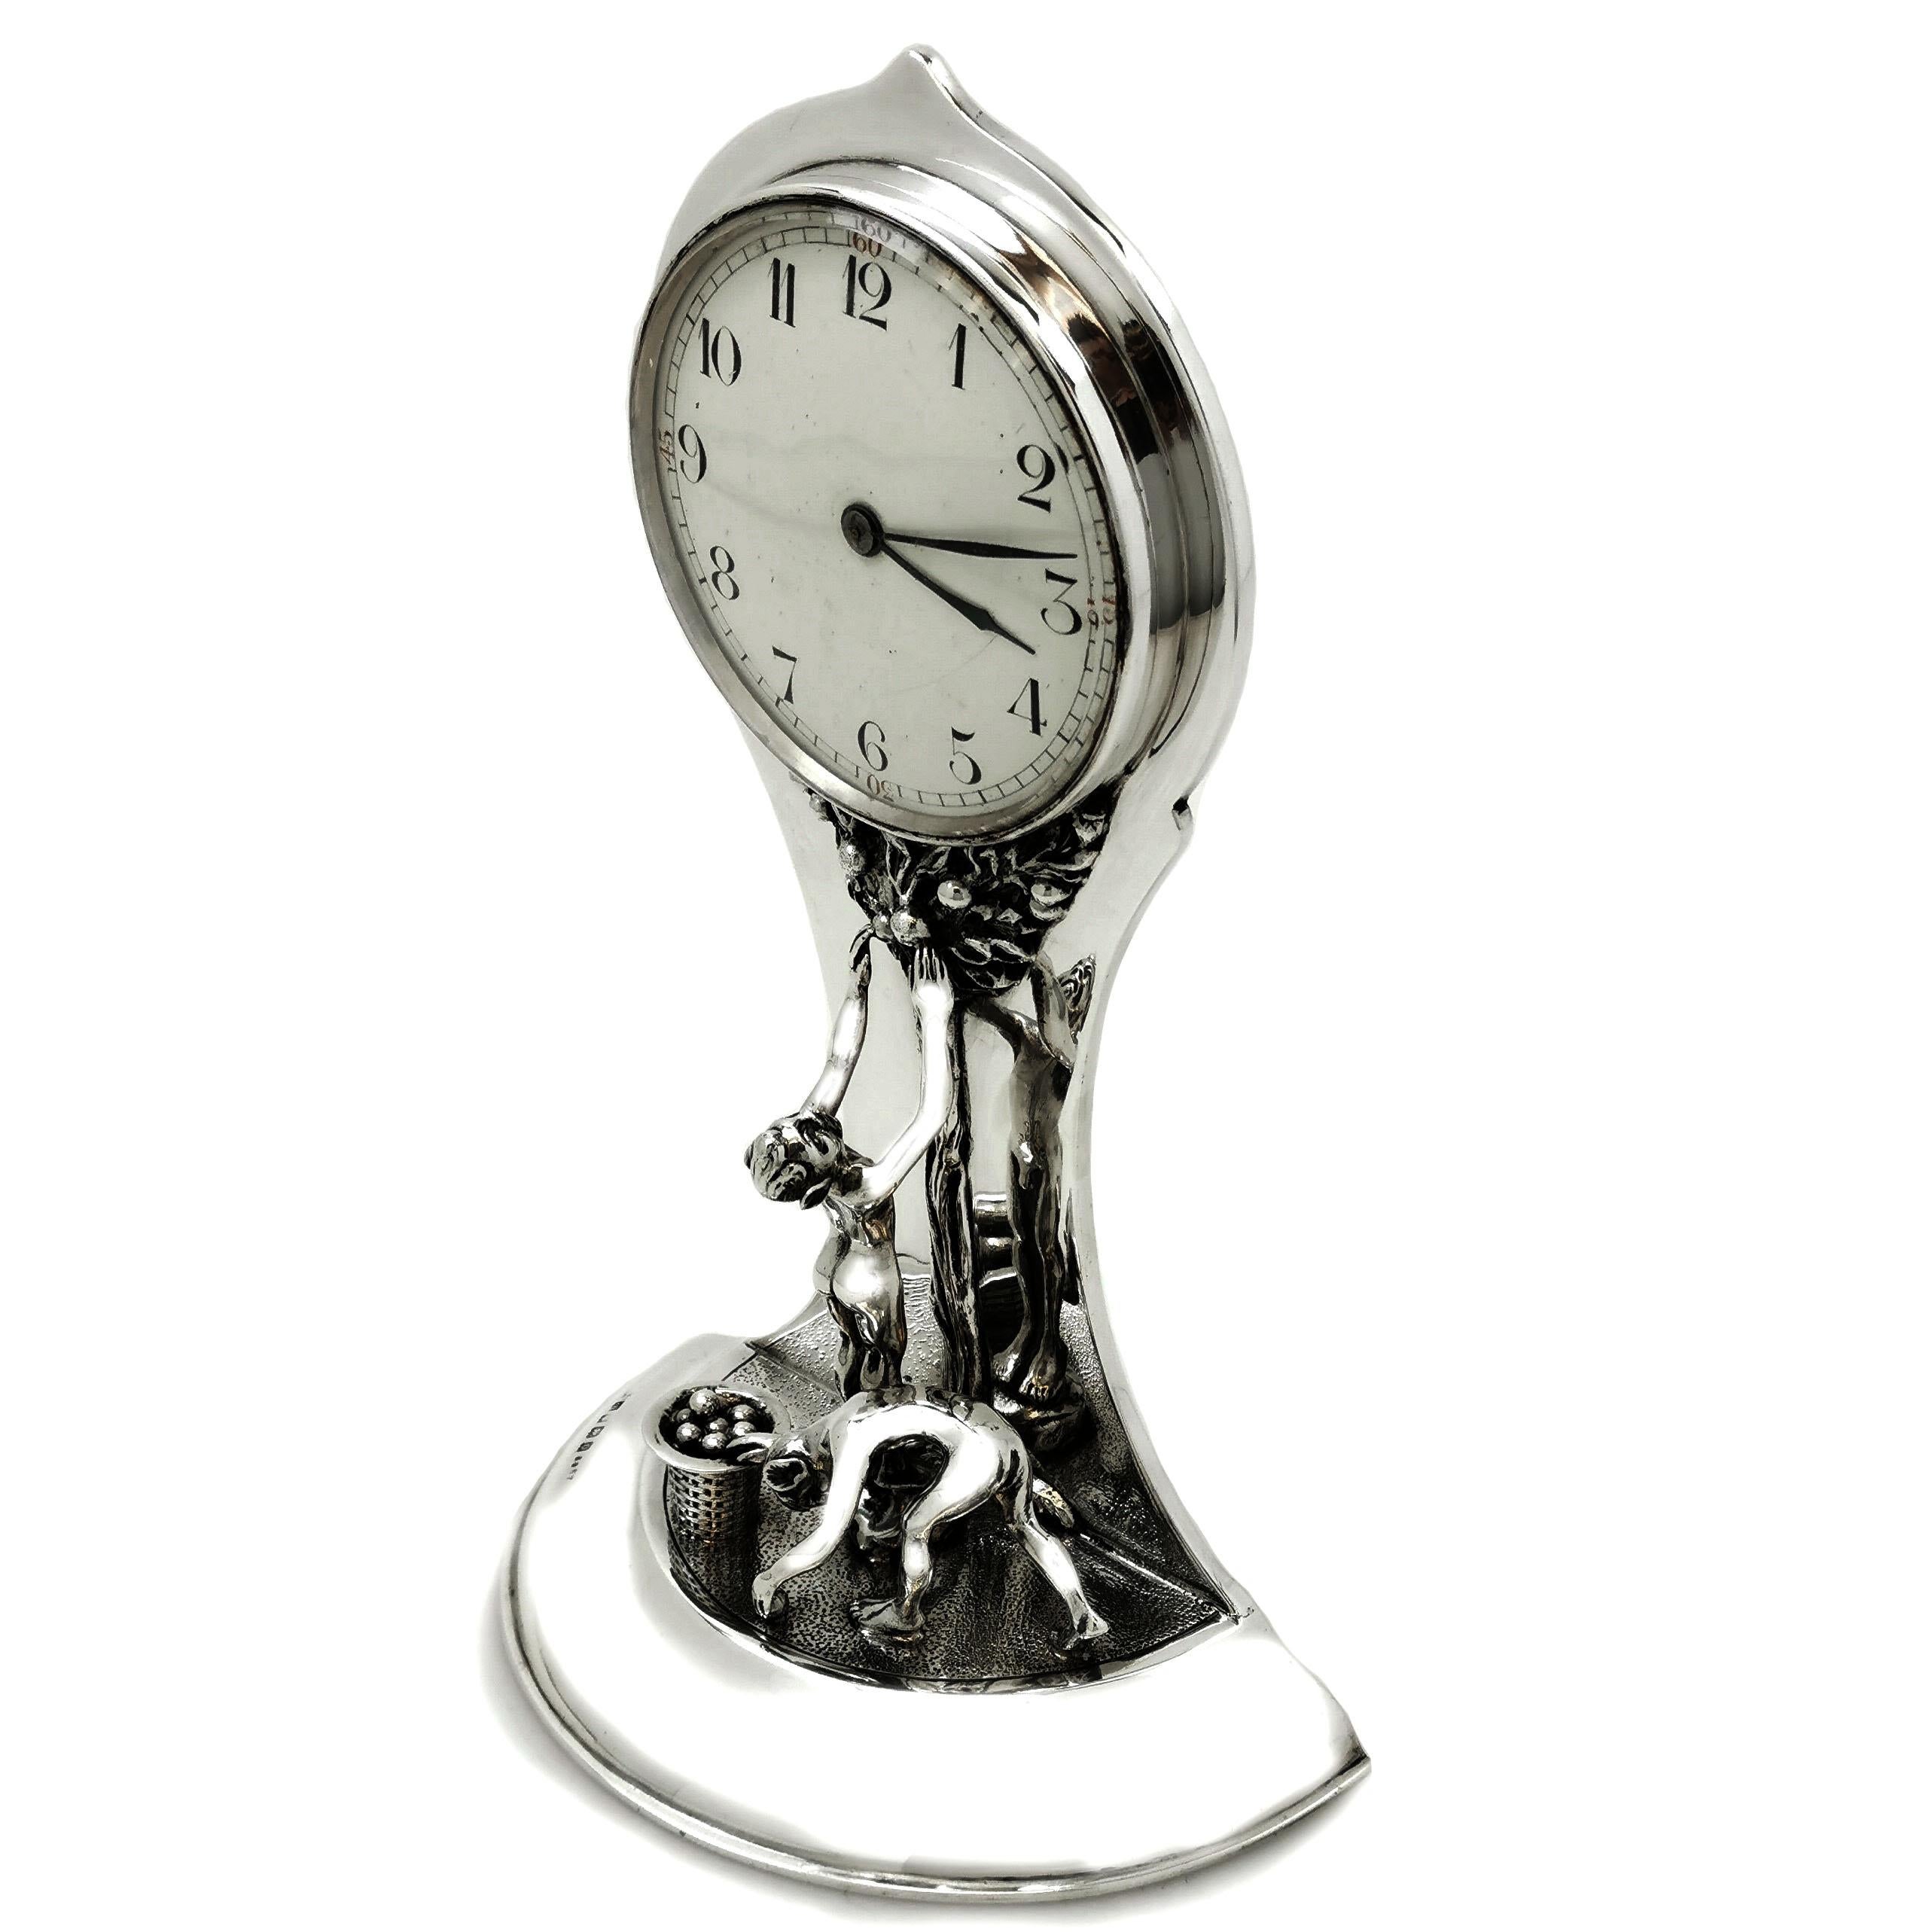 Antique Silver Art Nouveau Table Clock Mantle 1913 Tree of Life Design In Good Condition For Sale In London, GB